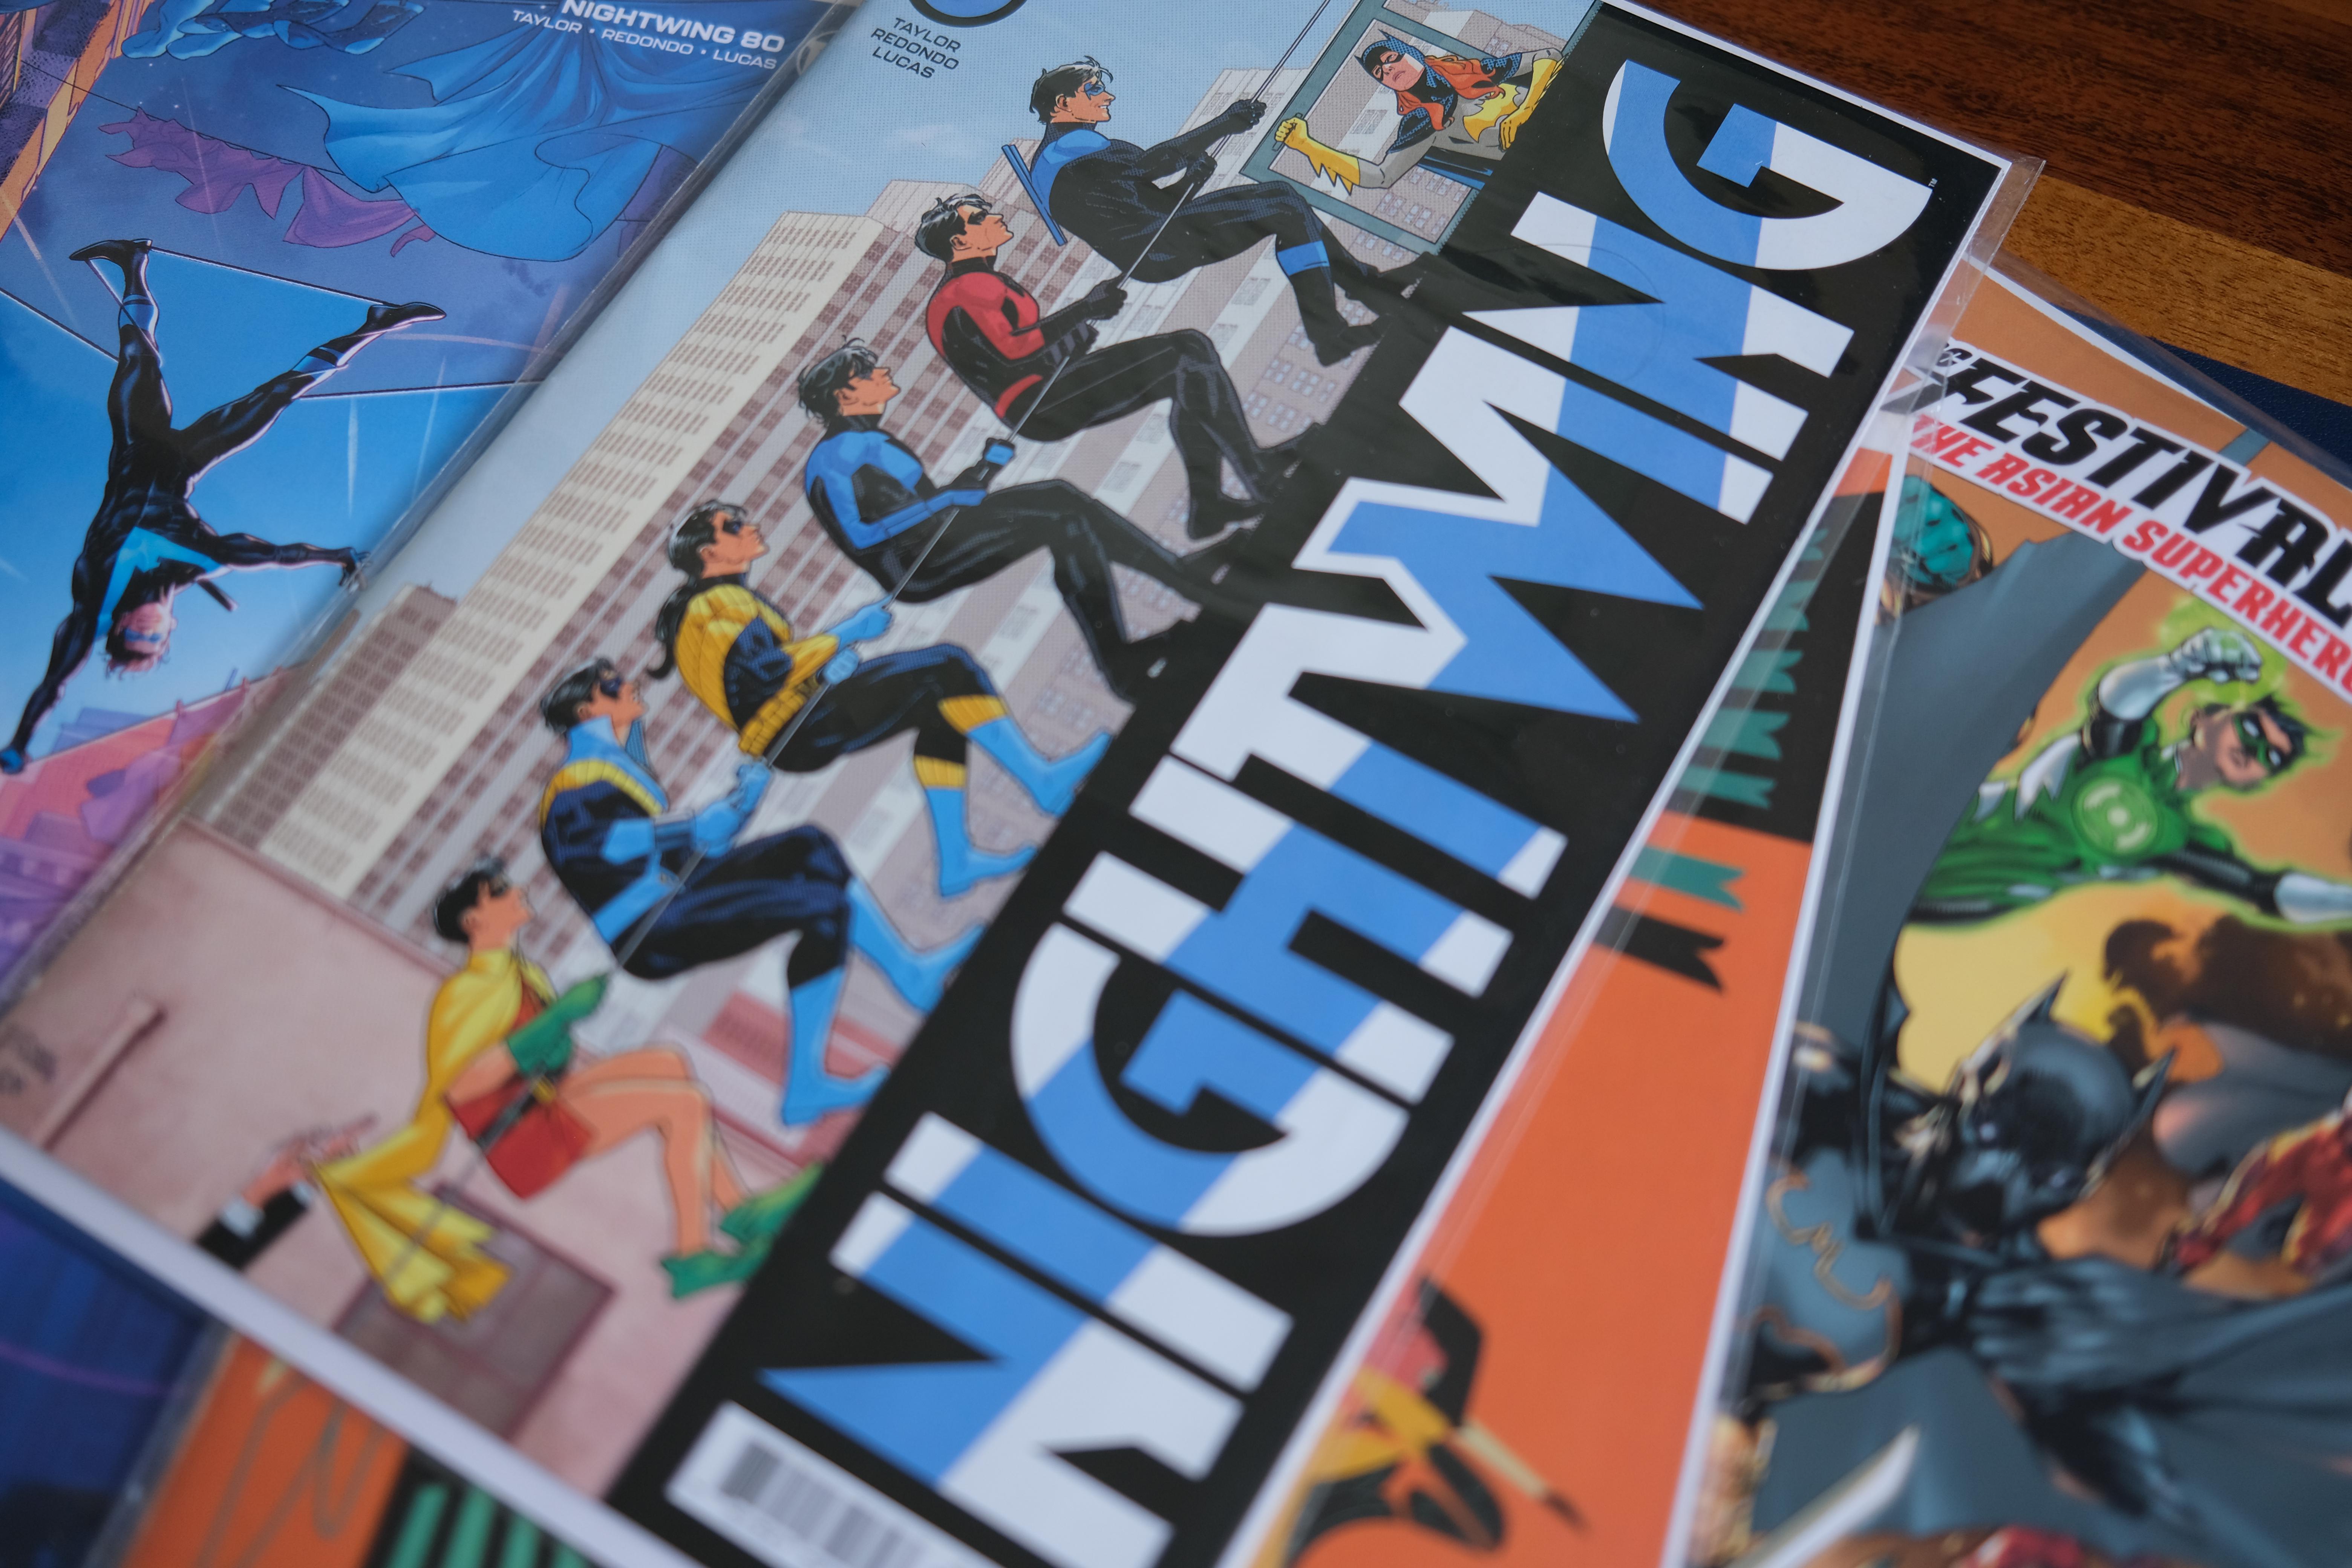 Photograph of American comic books, including a few issues of Nightwing from DC Comics.